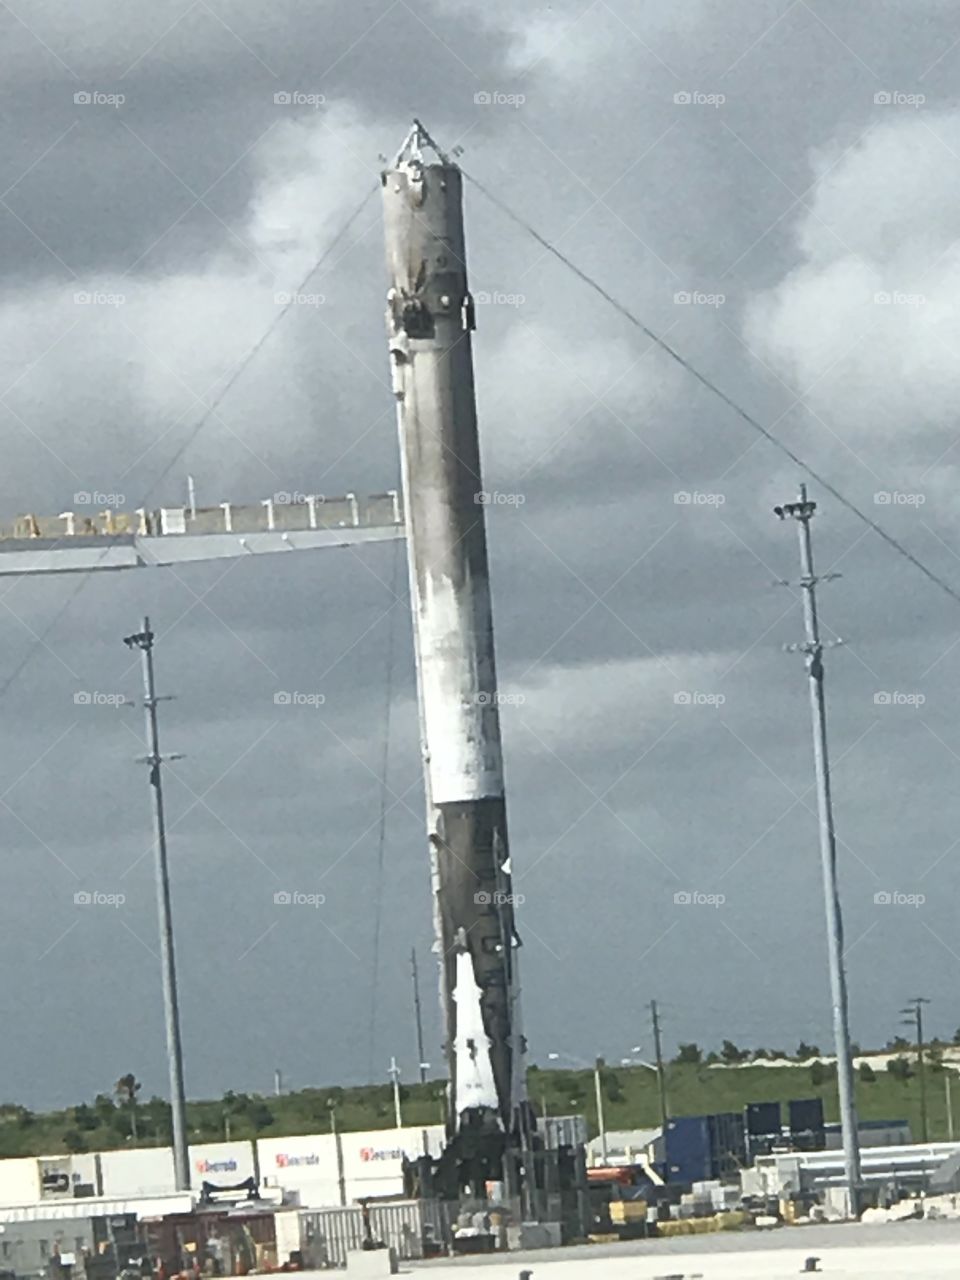 SpaceX Falcon 9 Rocket returning to Port Canaveral on OCISLY 